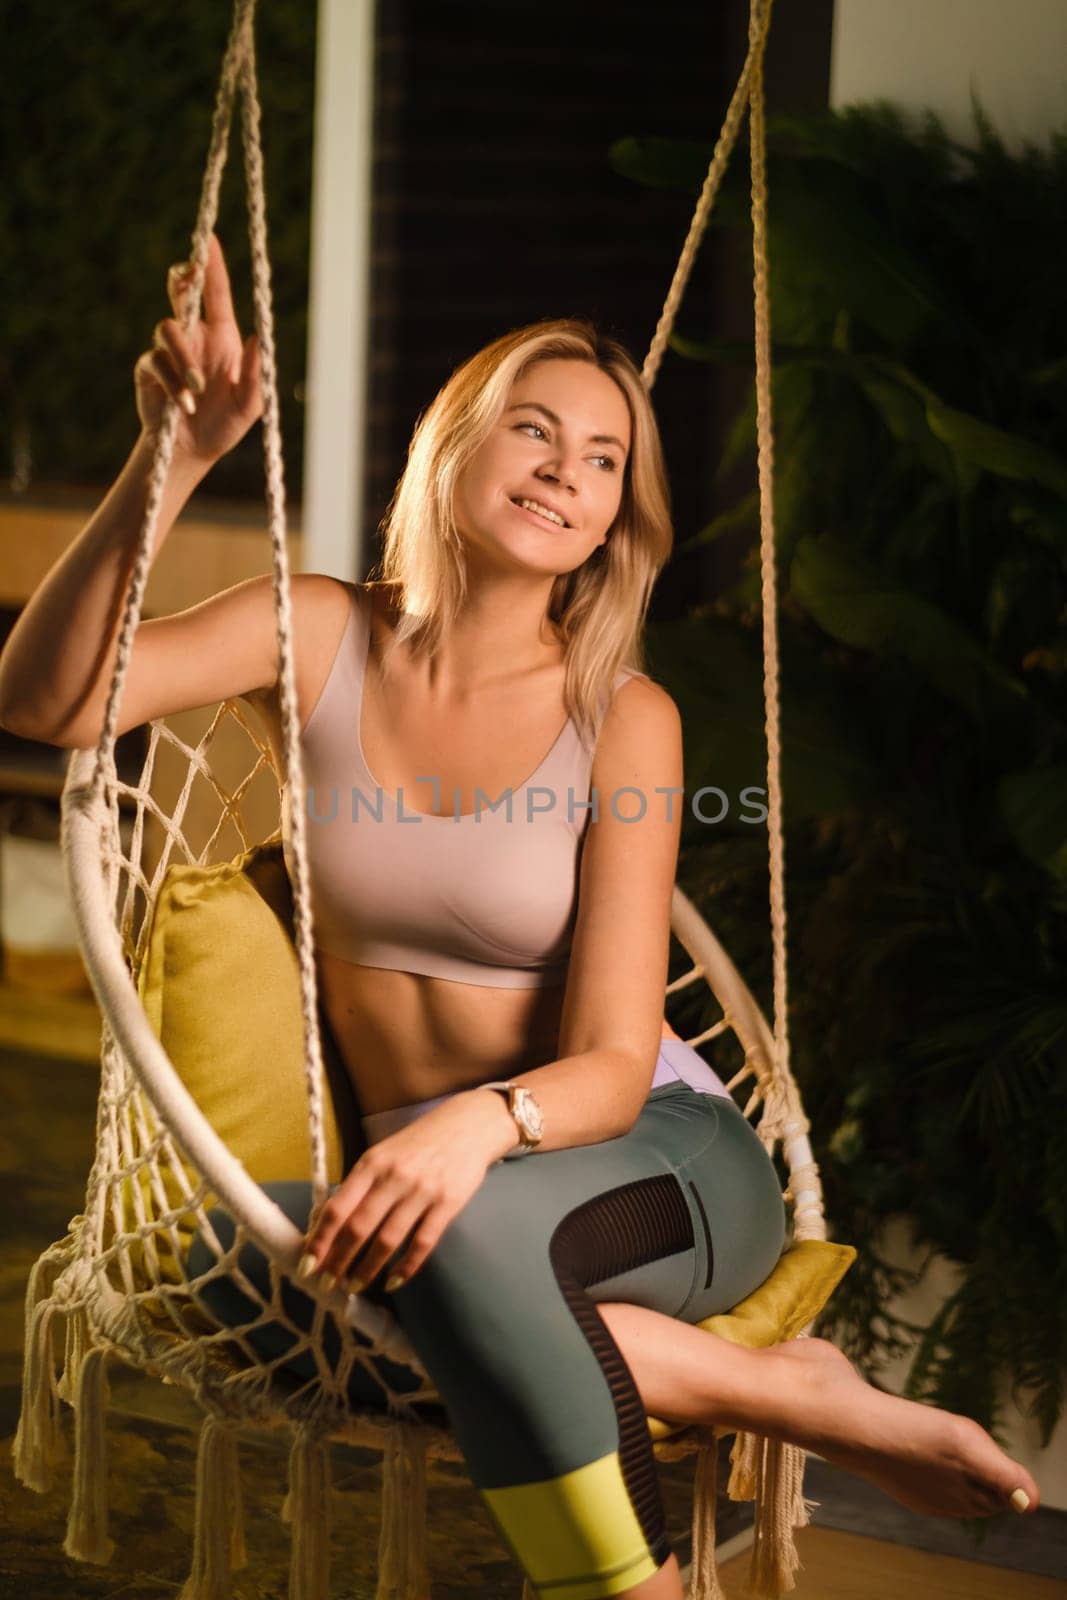 A young woman is resting in a chair after a sports workout and yoga class.